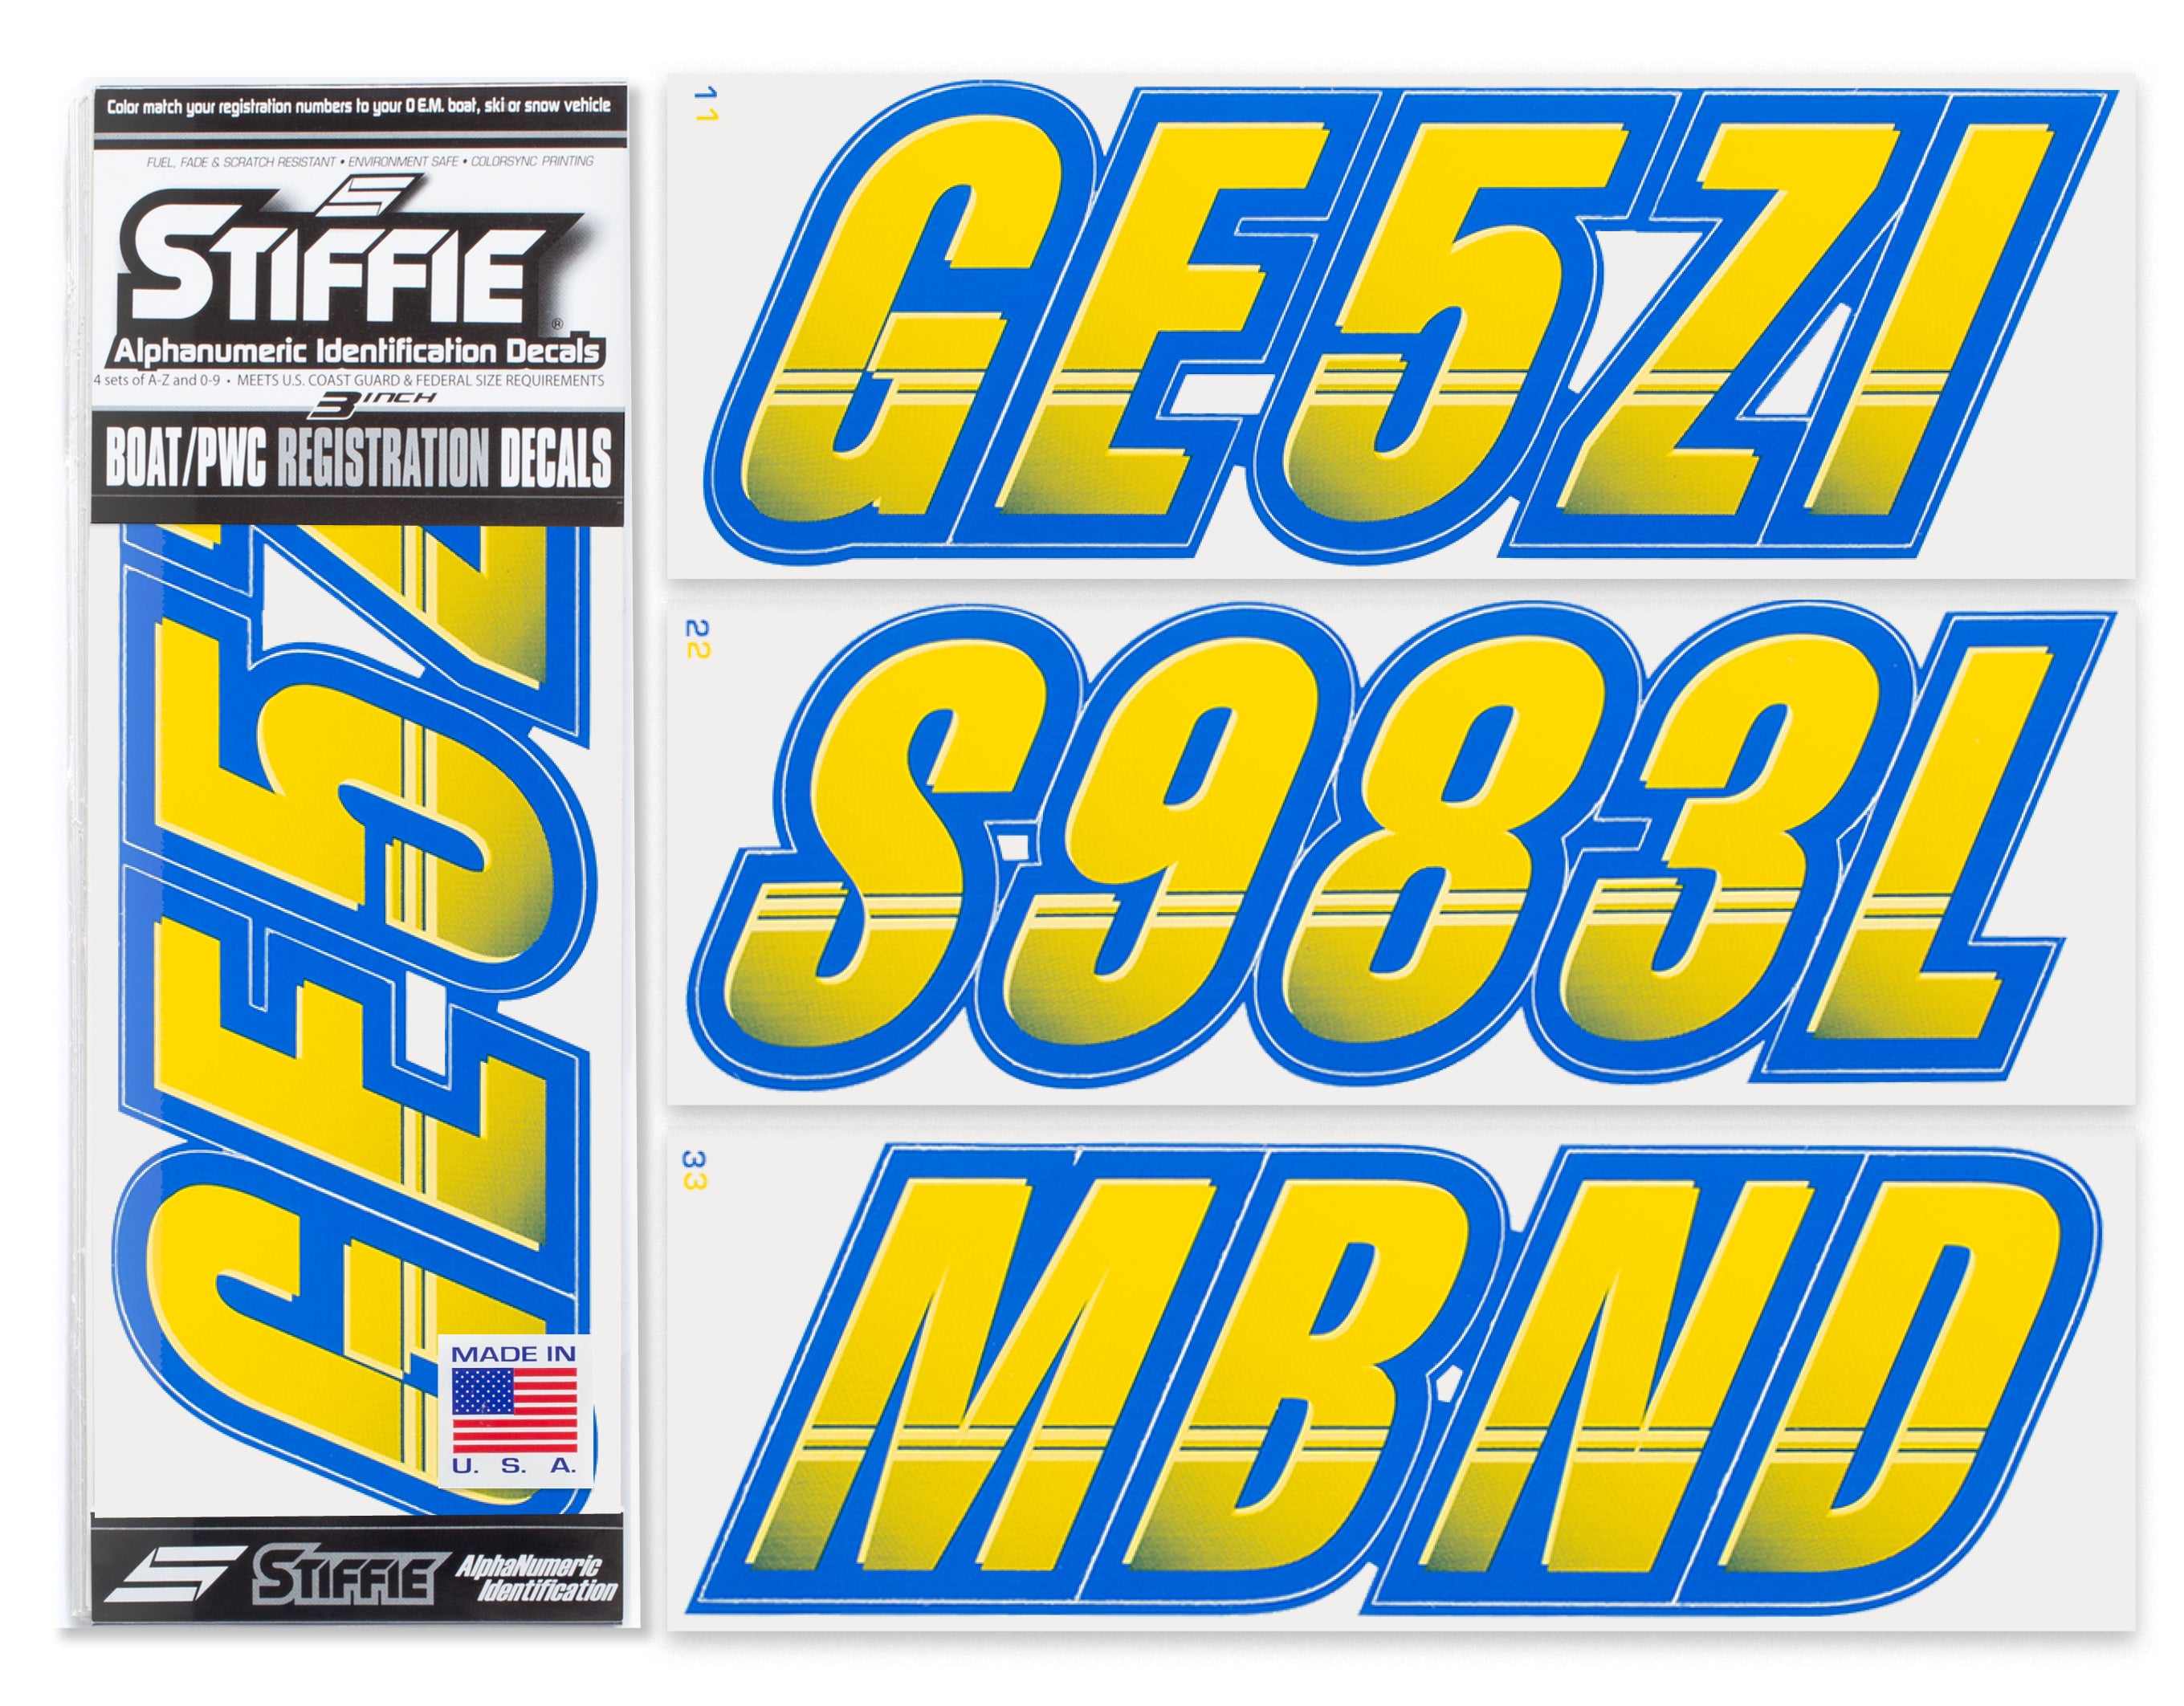 STIFFIE Techtron Yellow/Blue 3" Alpha-Numeric Registration Identification Numbers Stickers Decals for Boats & Personal Watercraft